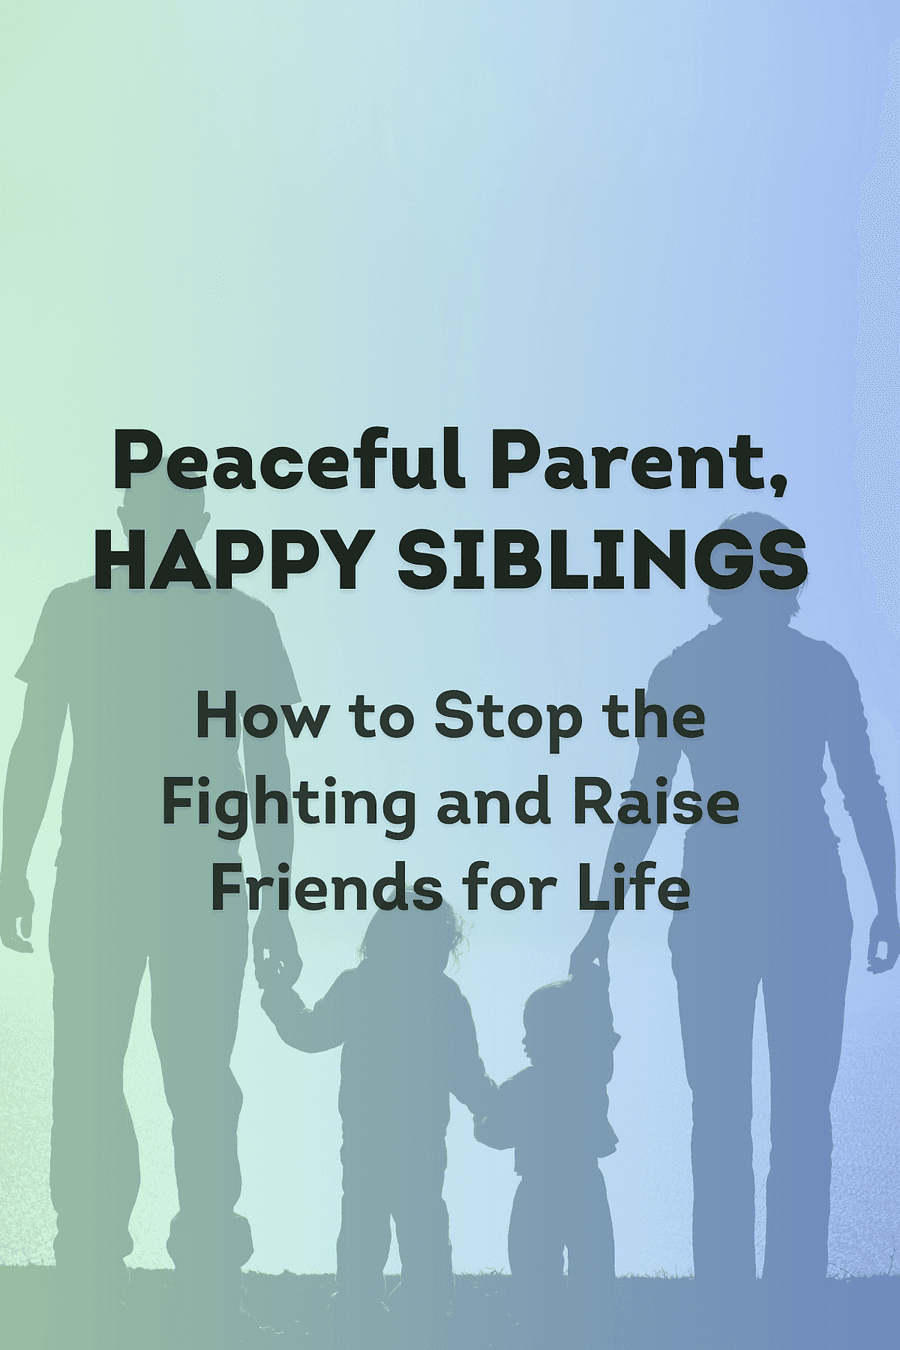 Peaceful Parent, Happy Siblings by Dr. Laura Markham - Book Summary